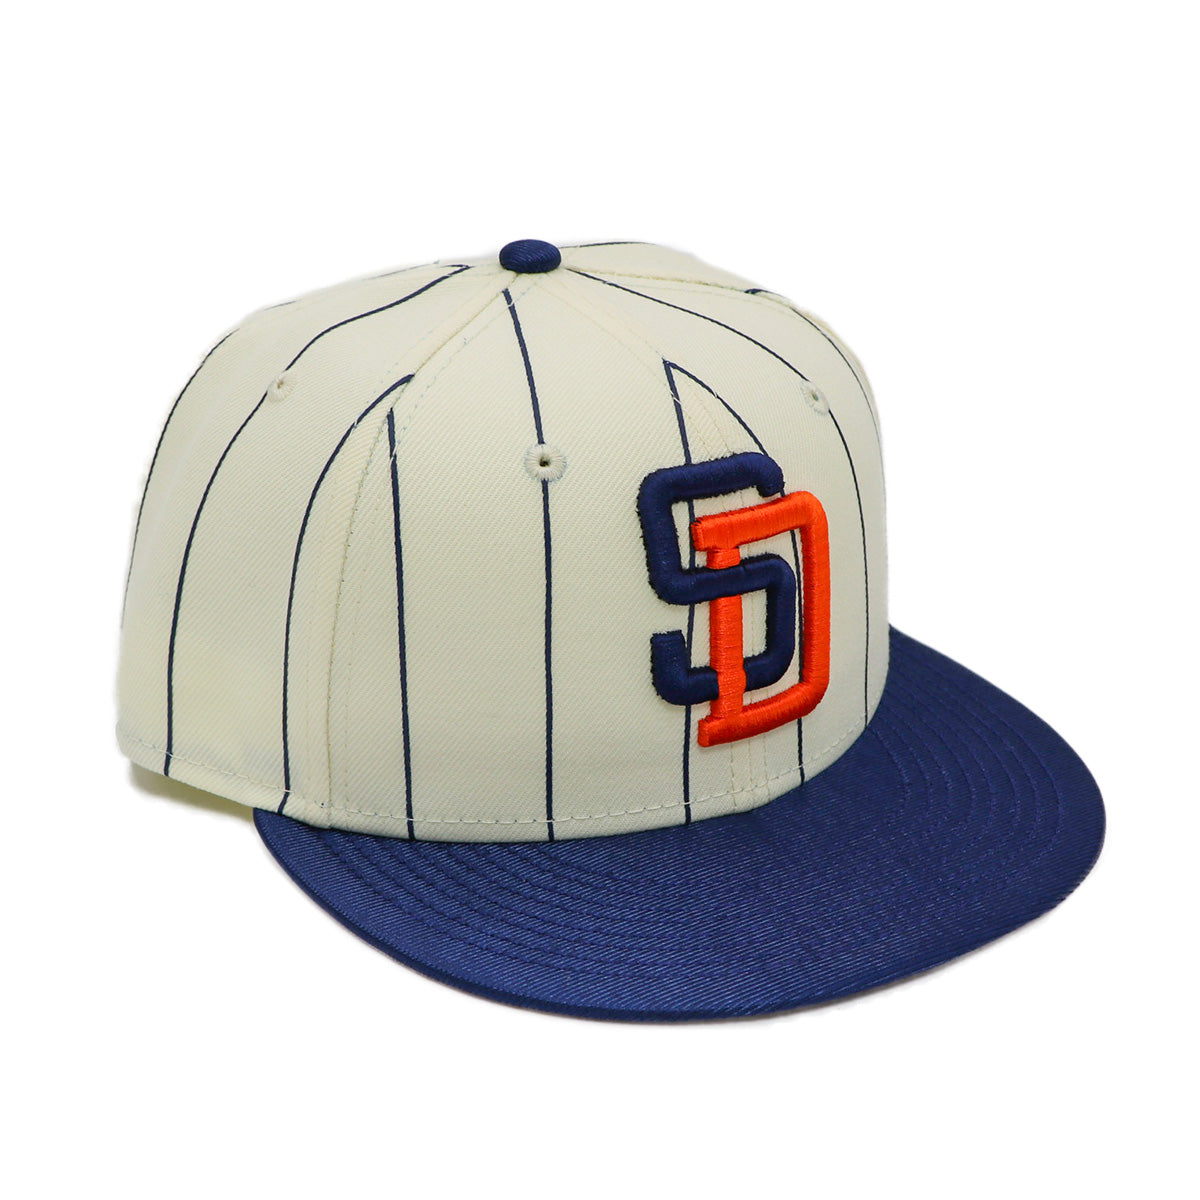 New Era 59FIFTY San Diego Padres Fitted Hat Grey White